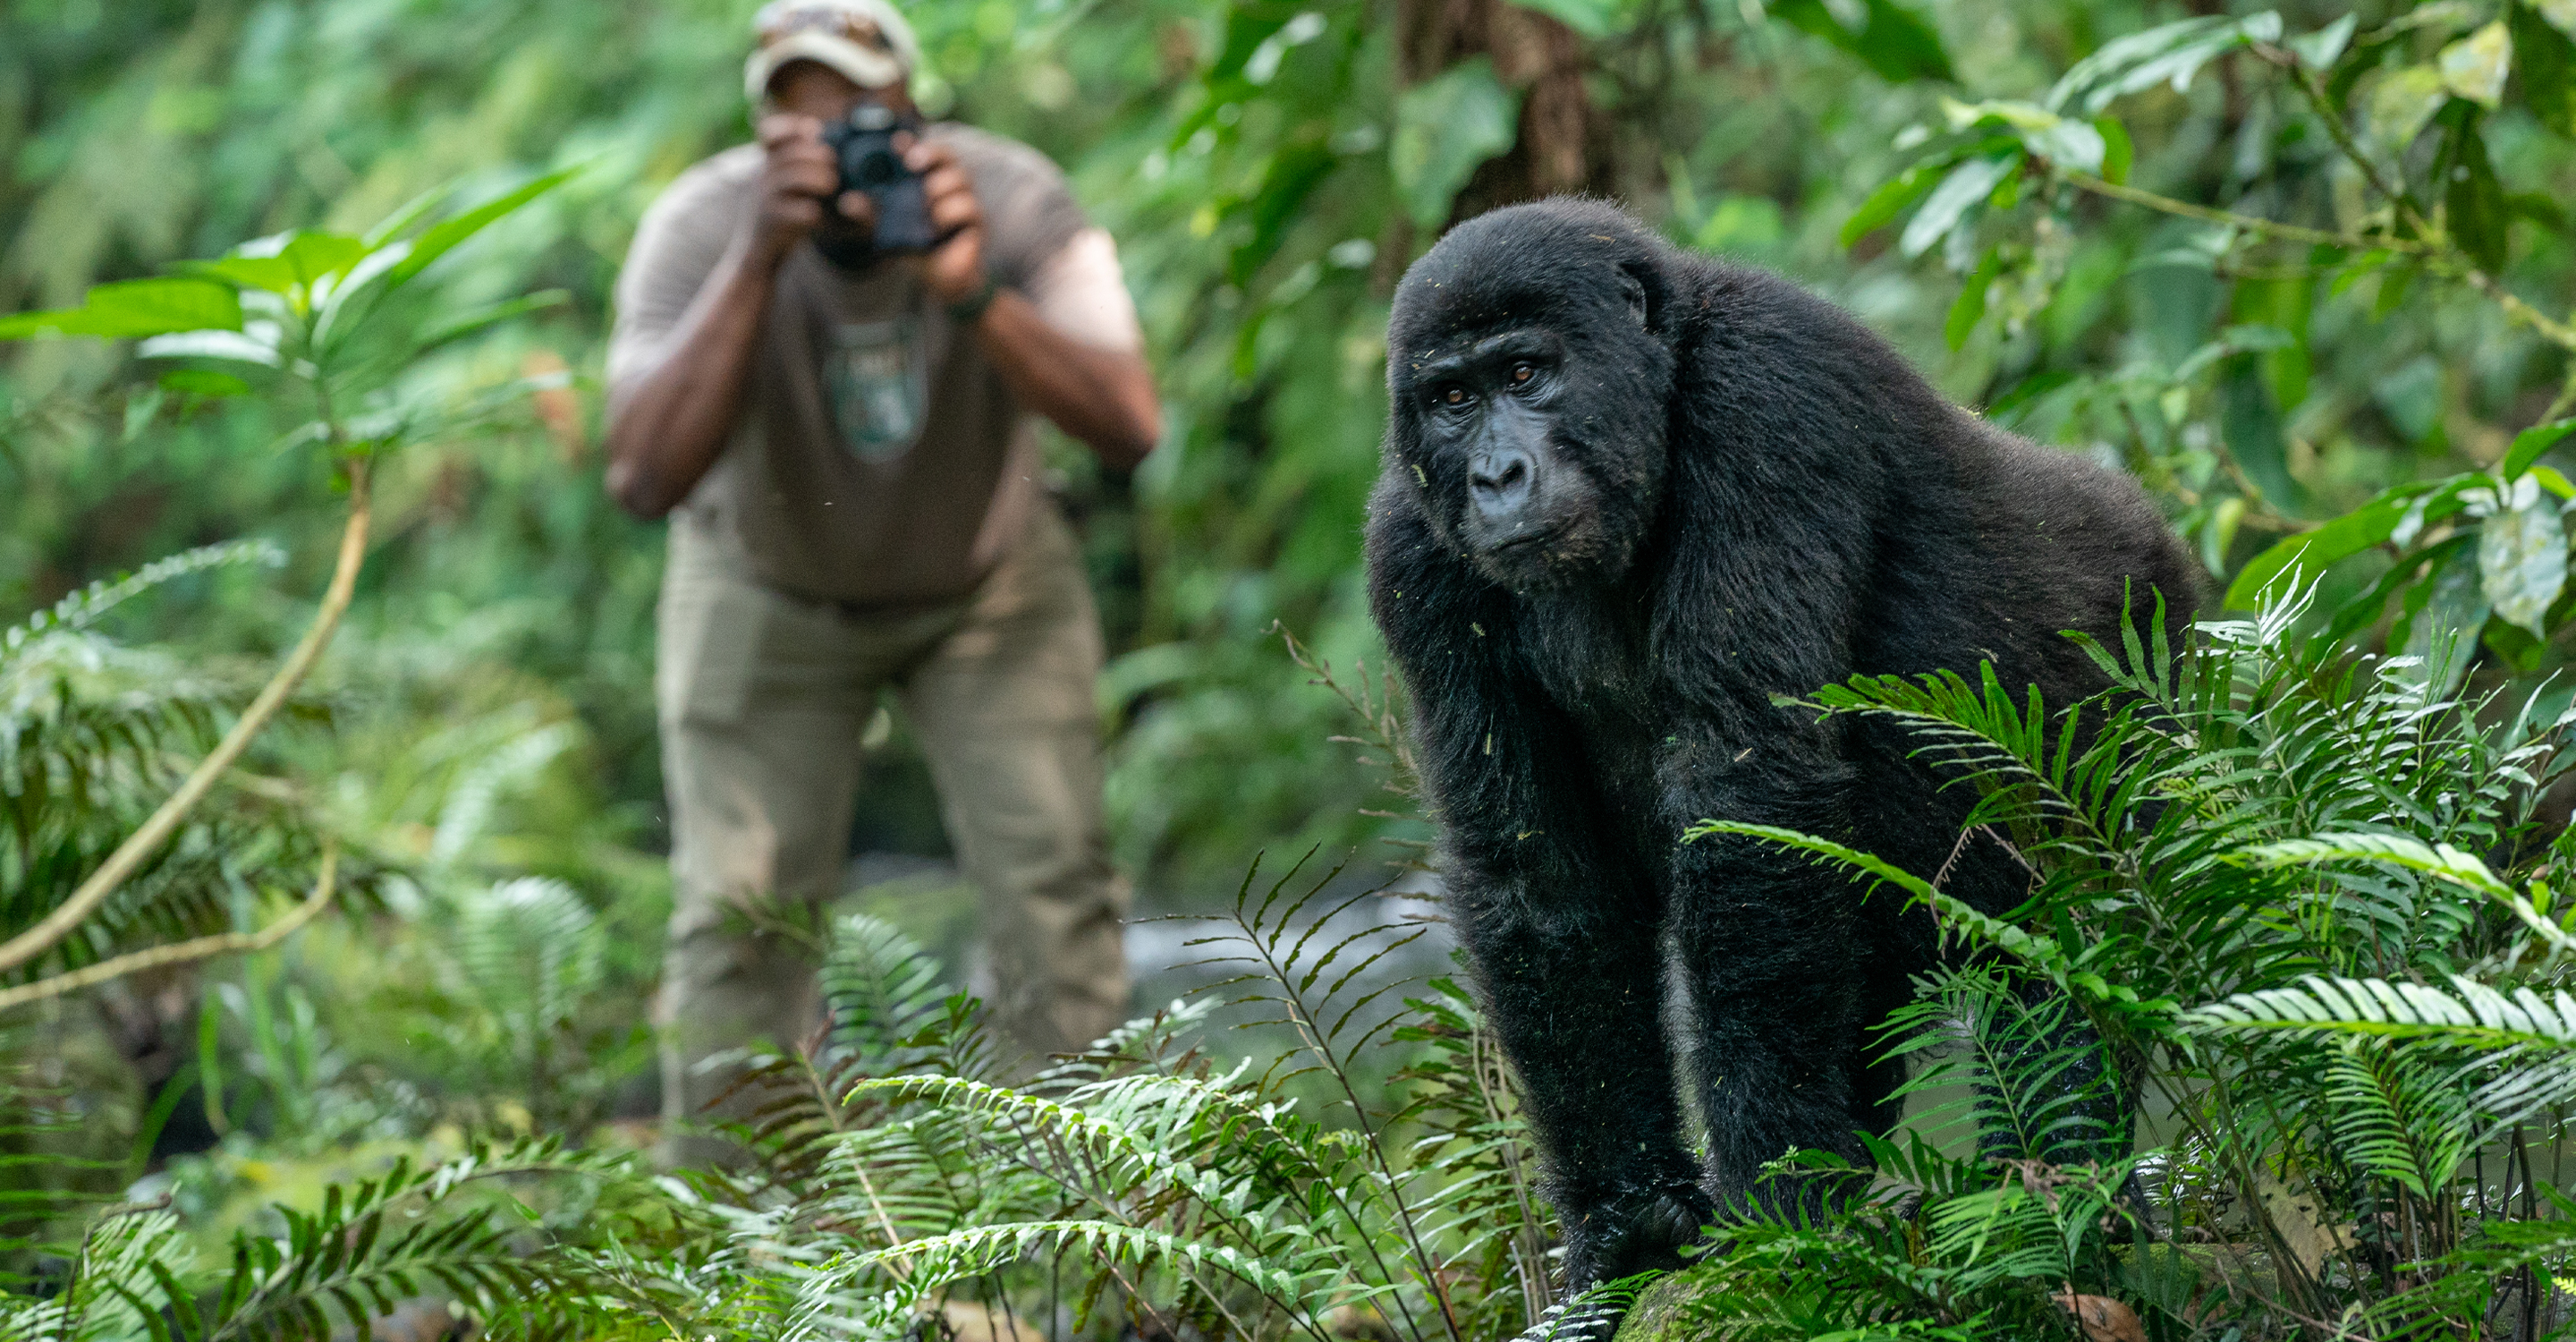 A Natural Habitat Adventures guide photographs a young female mountain gorilla in Bwindi Impenetrable National Park, Uganda